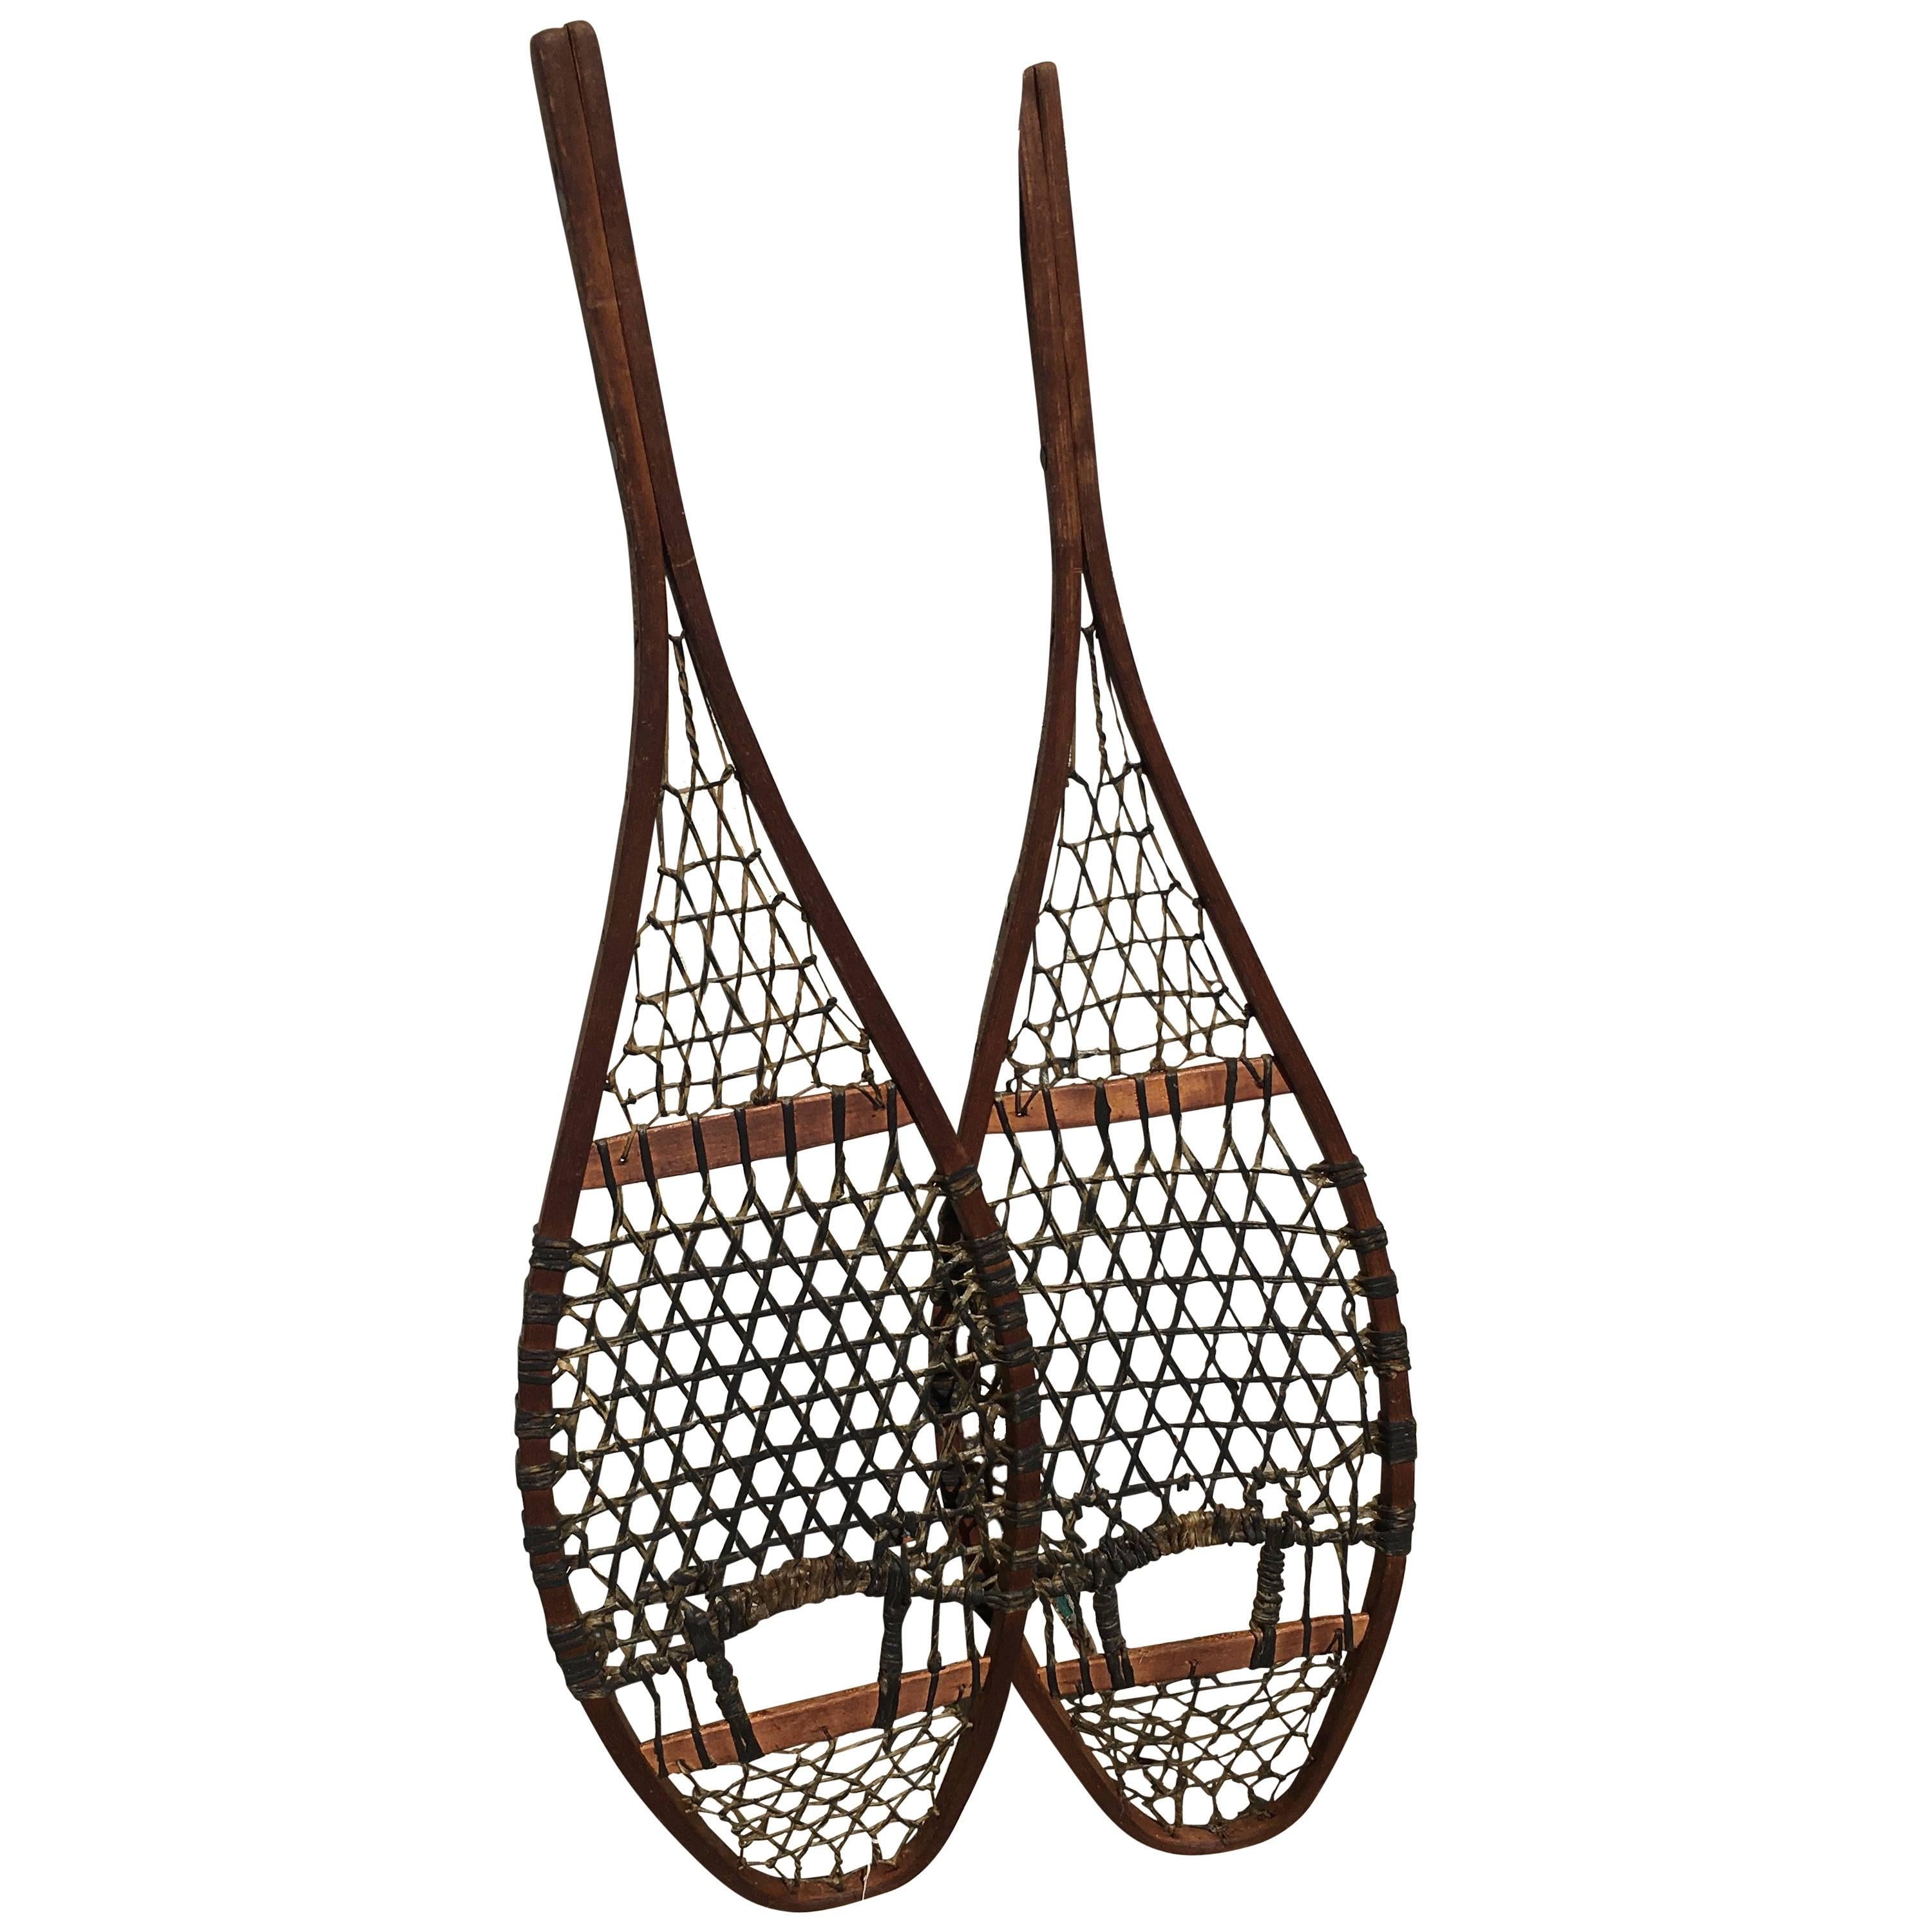 Handsome Pair of 19th Century Snow Shoes, Great as Wall Sculpture